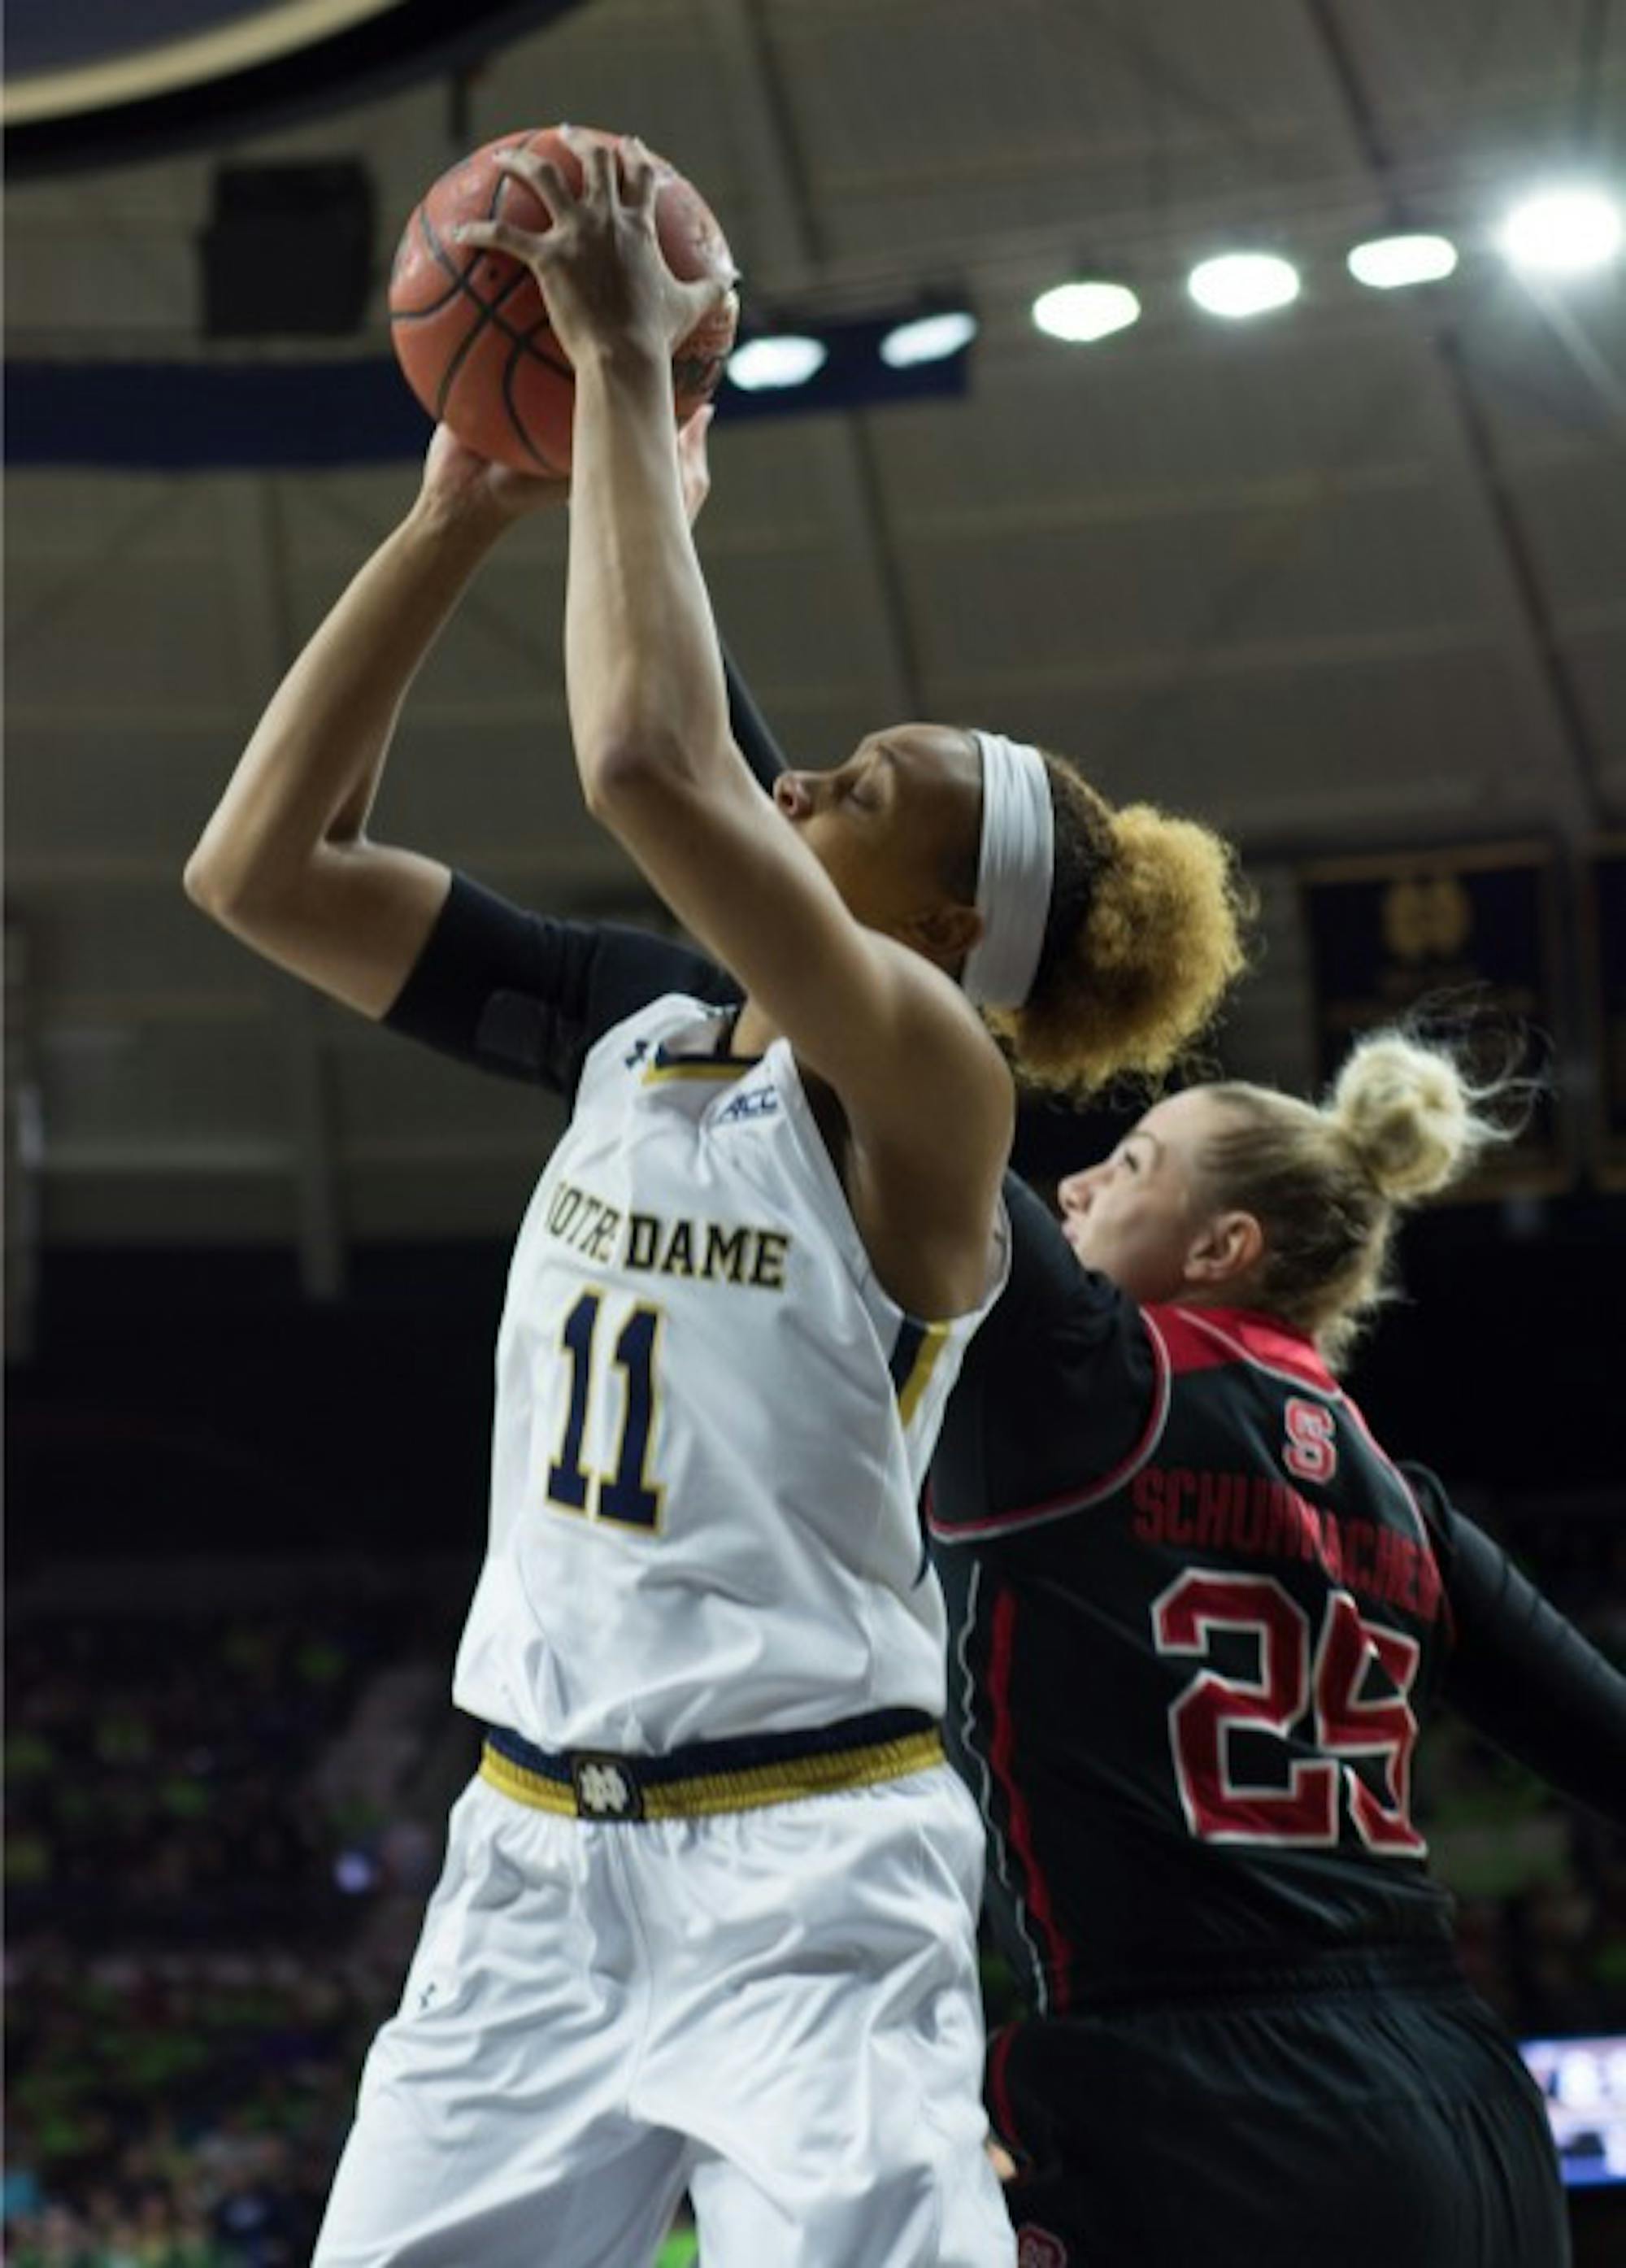 Sophomore forward Brianna Turner shoots the ball during Notre Dame’s victory over NC State on Thursday at Purcell Pavilion.